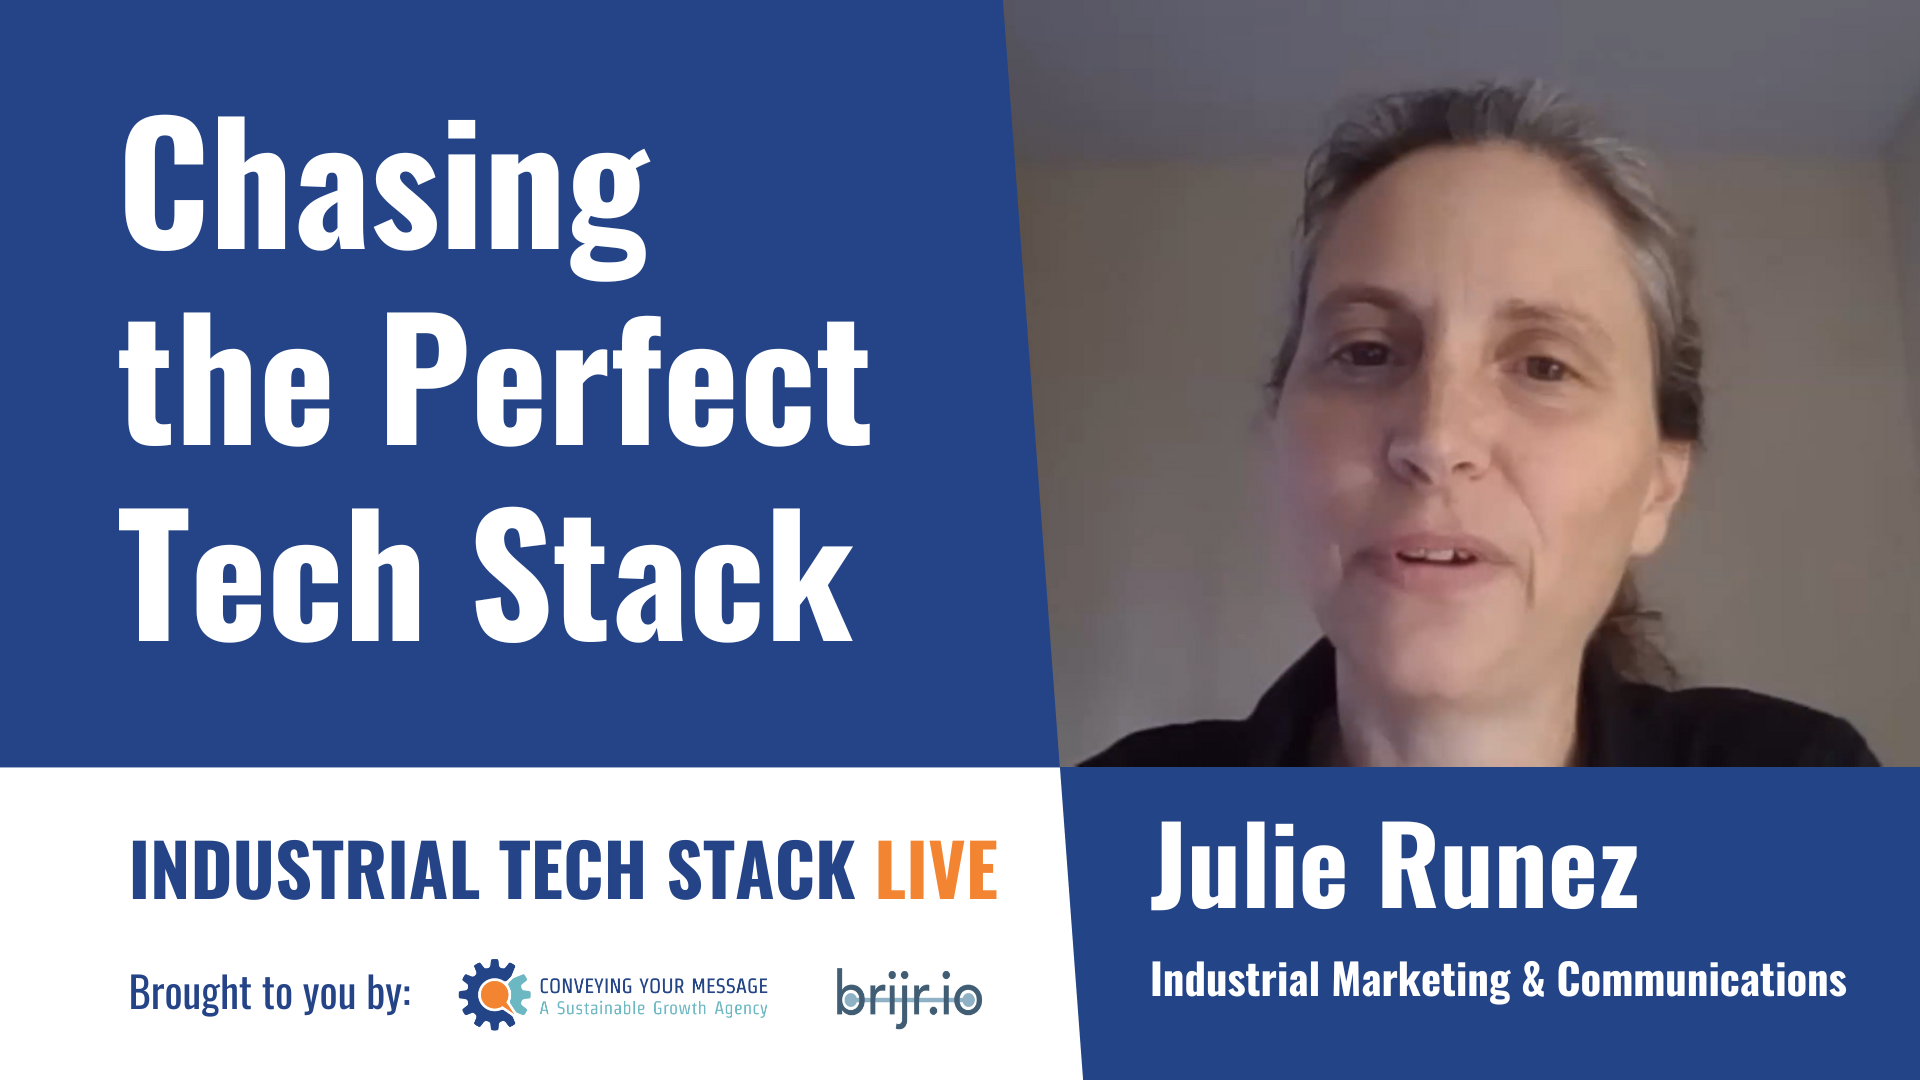 Chasing the Perfect Tech Stack (Feat Julie Runez)